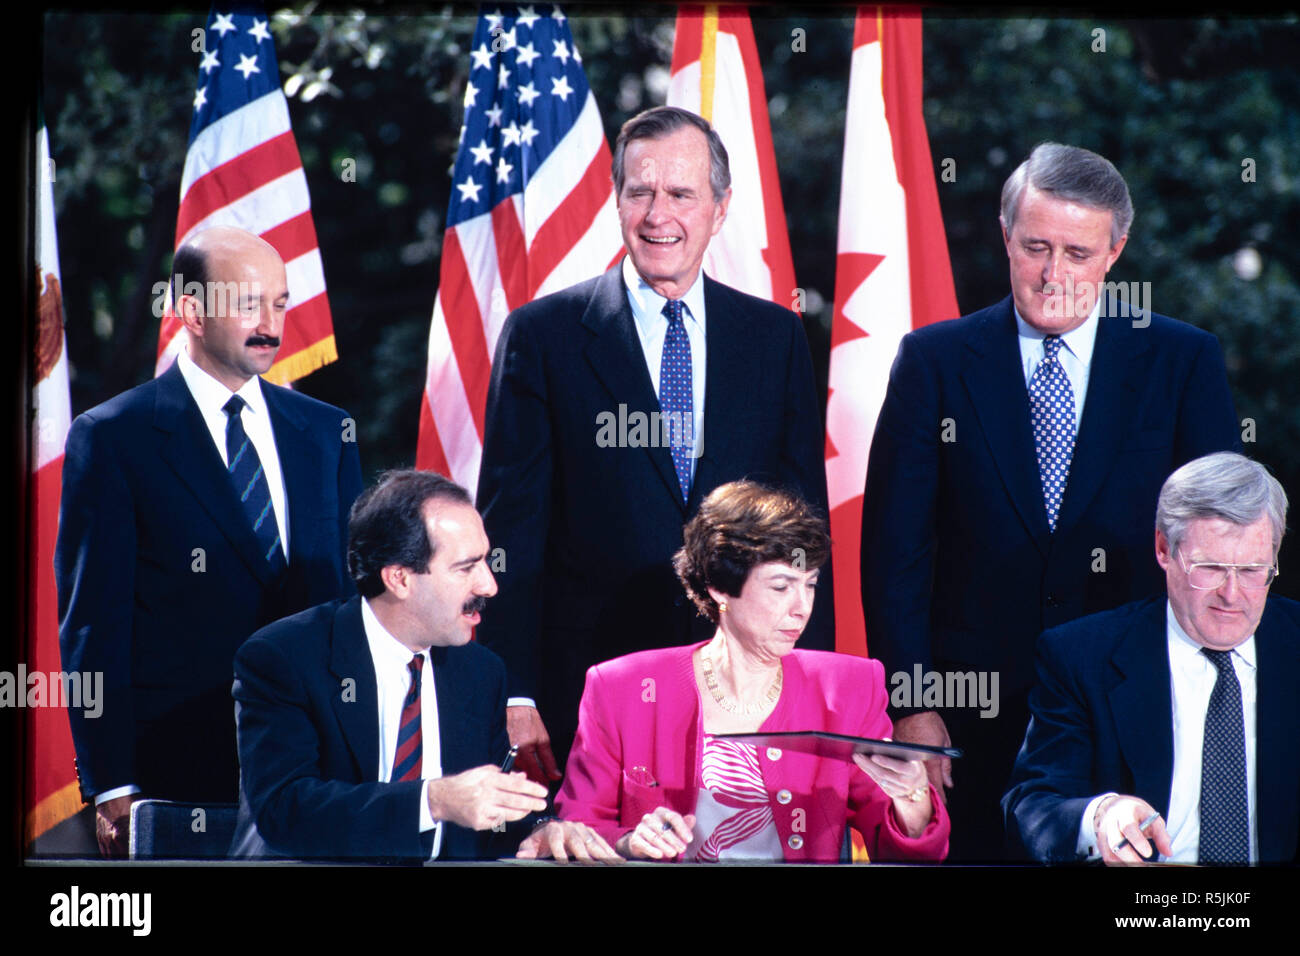 FILE October 1992: President George H.W. Bush, standing center, presides over the North America Free Trade Agreement (NAFTA) ceremonial signing in San Antonio. Former Pres. George H.W. Bush passed away Nov. 30, 2018 in Houston, TX. Credit: Bob Daemmrich/Alamy Live News Stock Photo